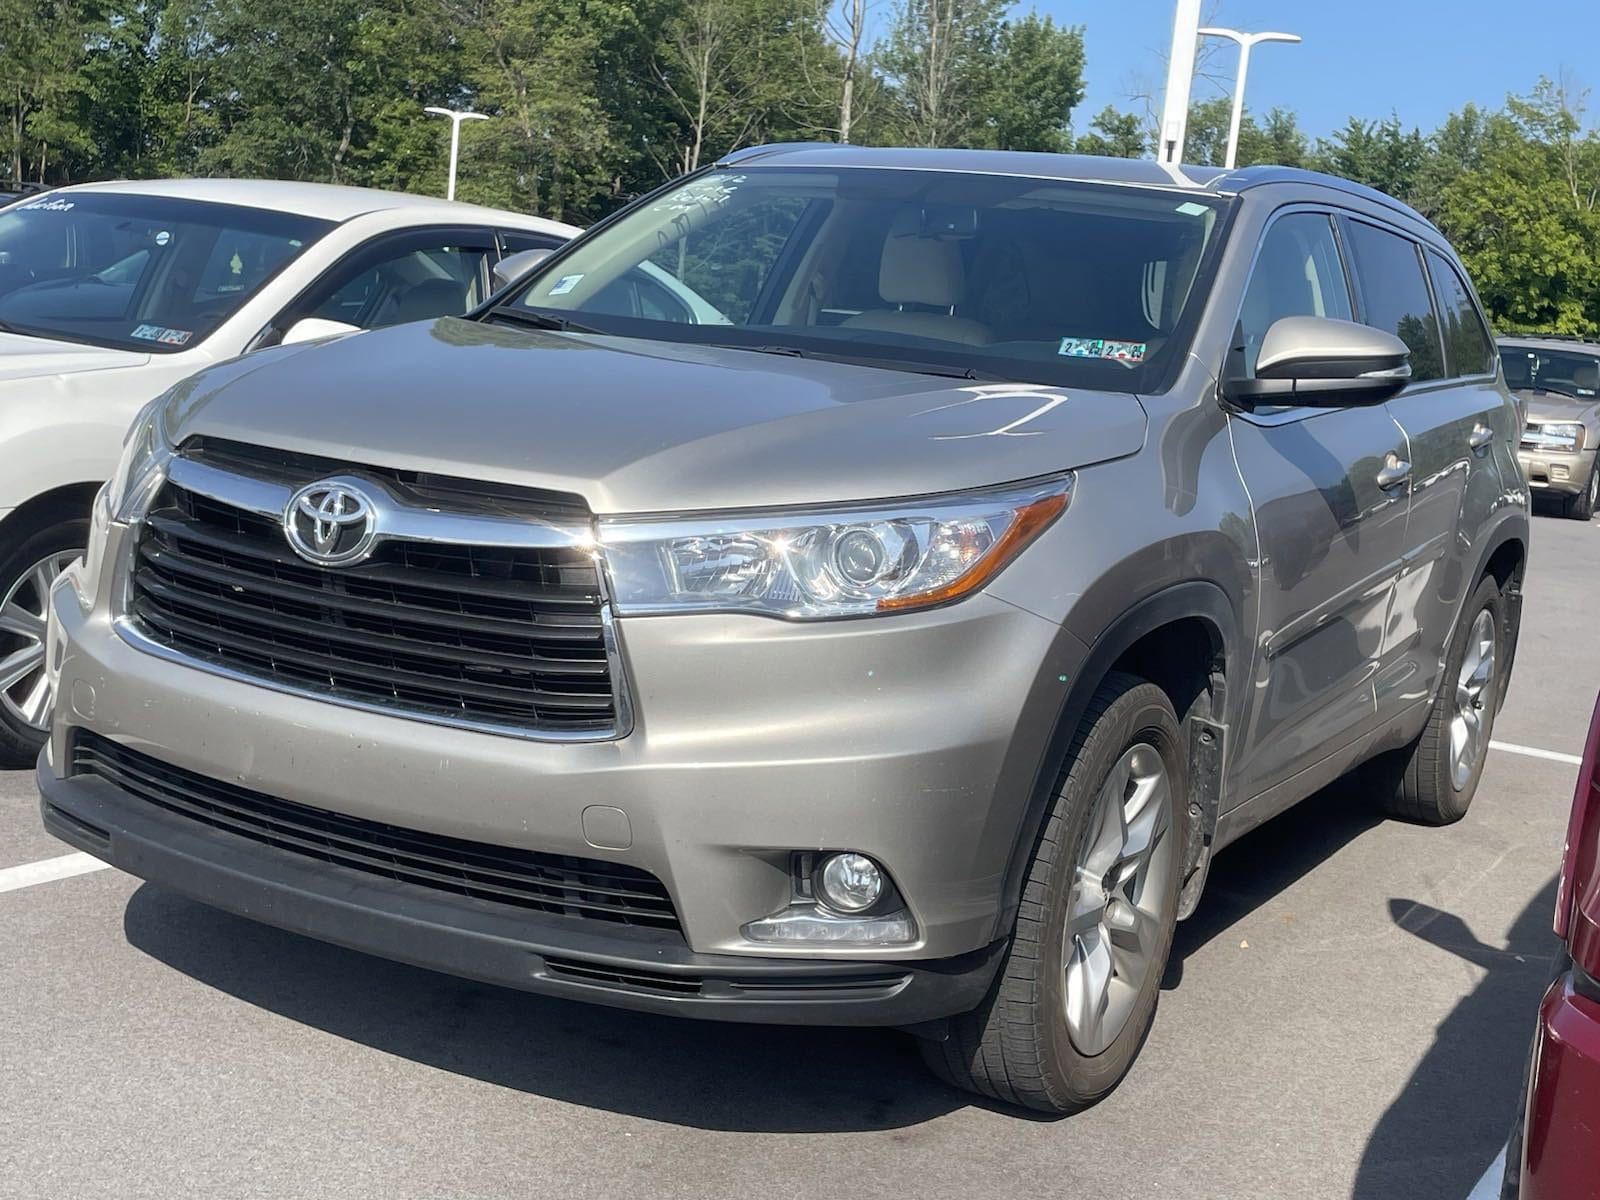 Used 2015 Toyota Highlander Limited with VIN 5TDDKRFH8FS213636 for sale in Muncy, PA